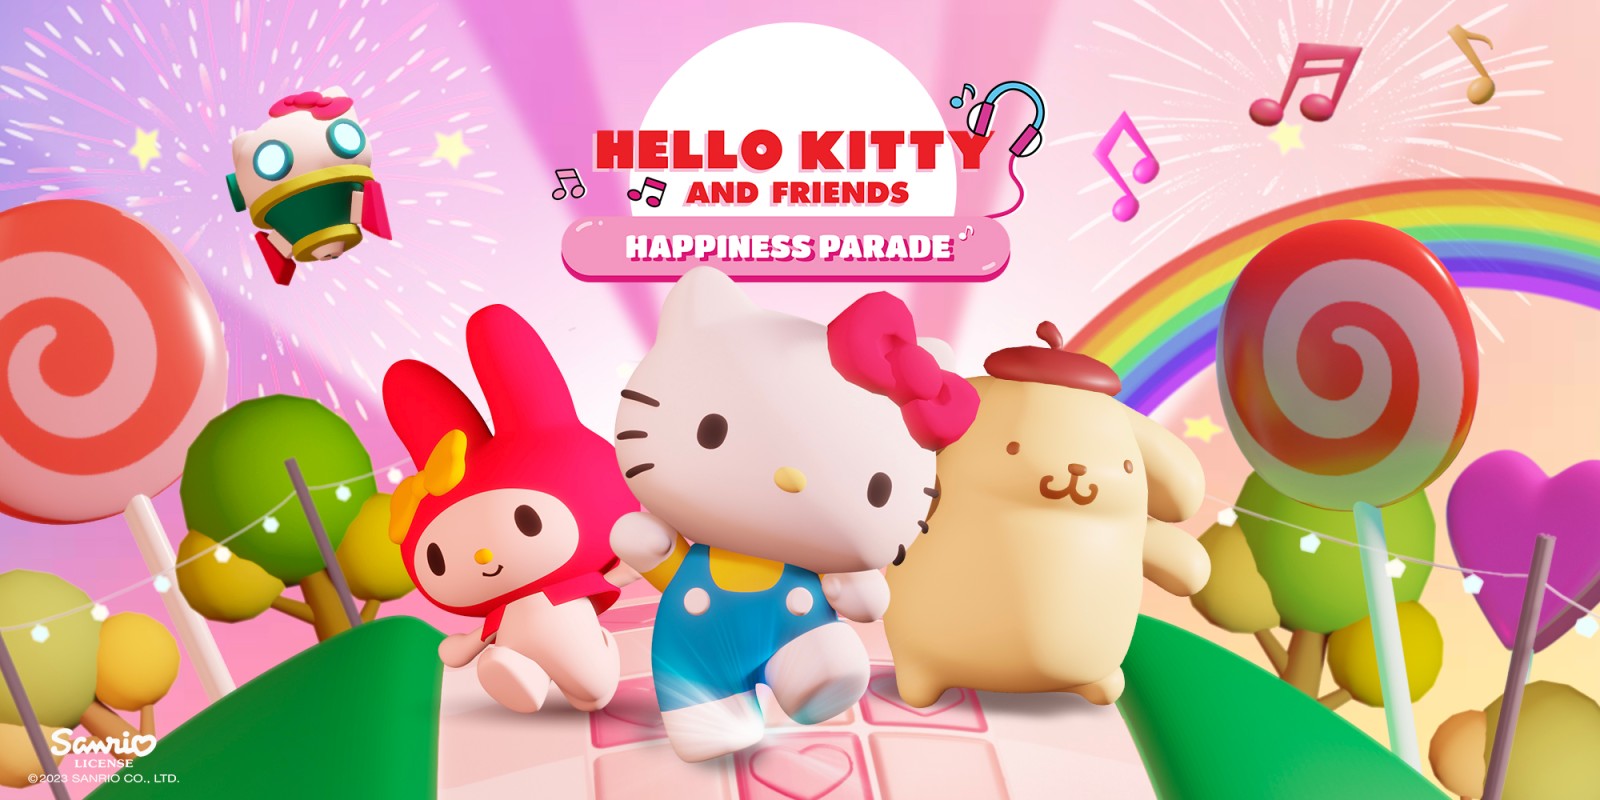 HELLO KITTY AND FRIENDS HAPPINESS PARADE